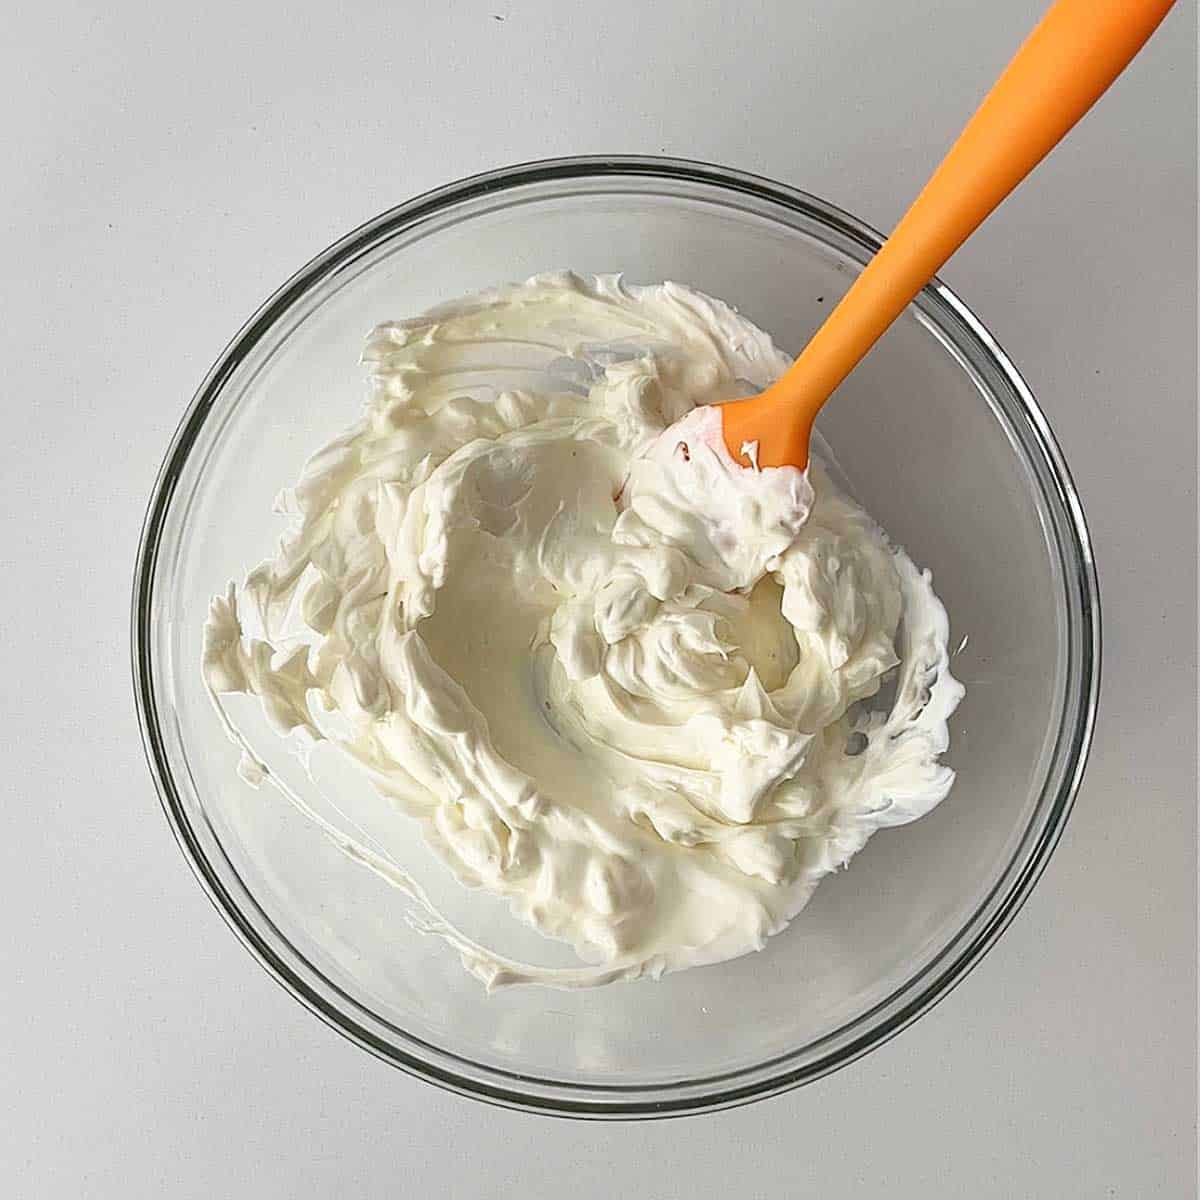 Mixing cream cheese in a bowl. 